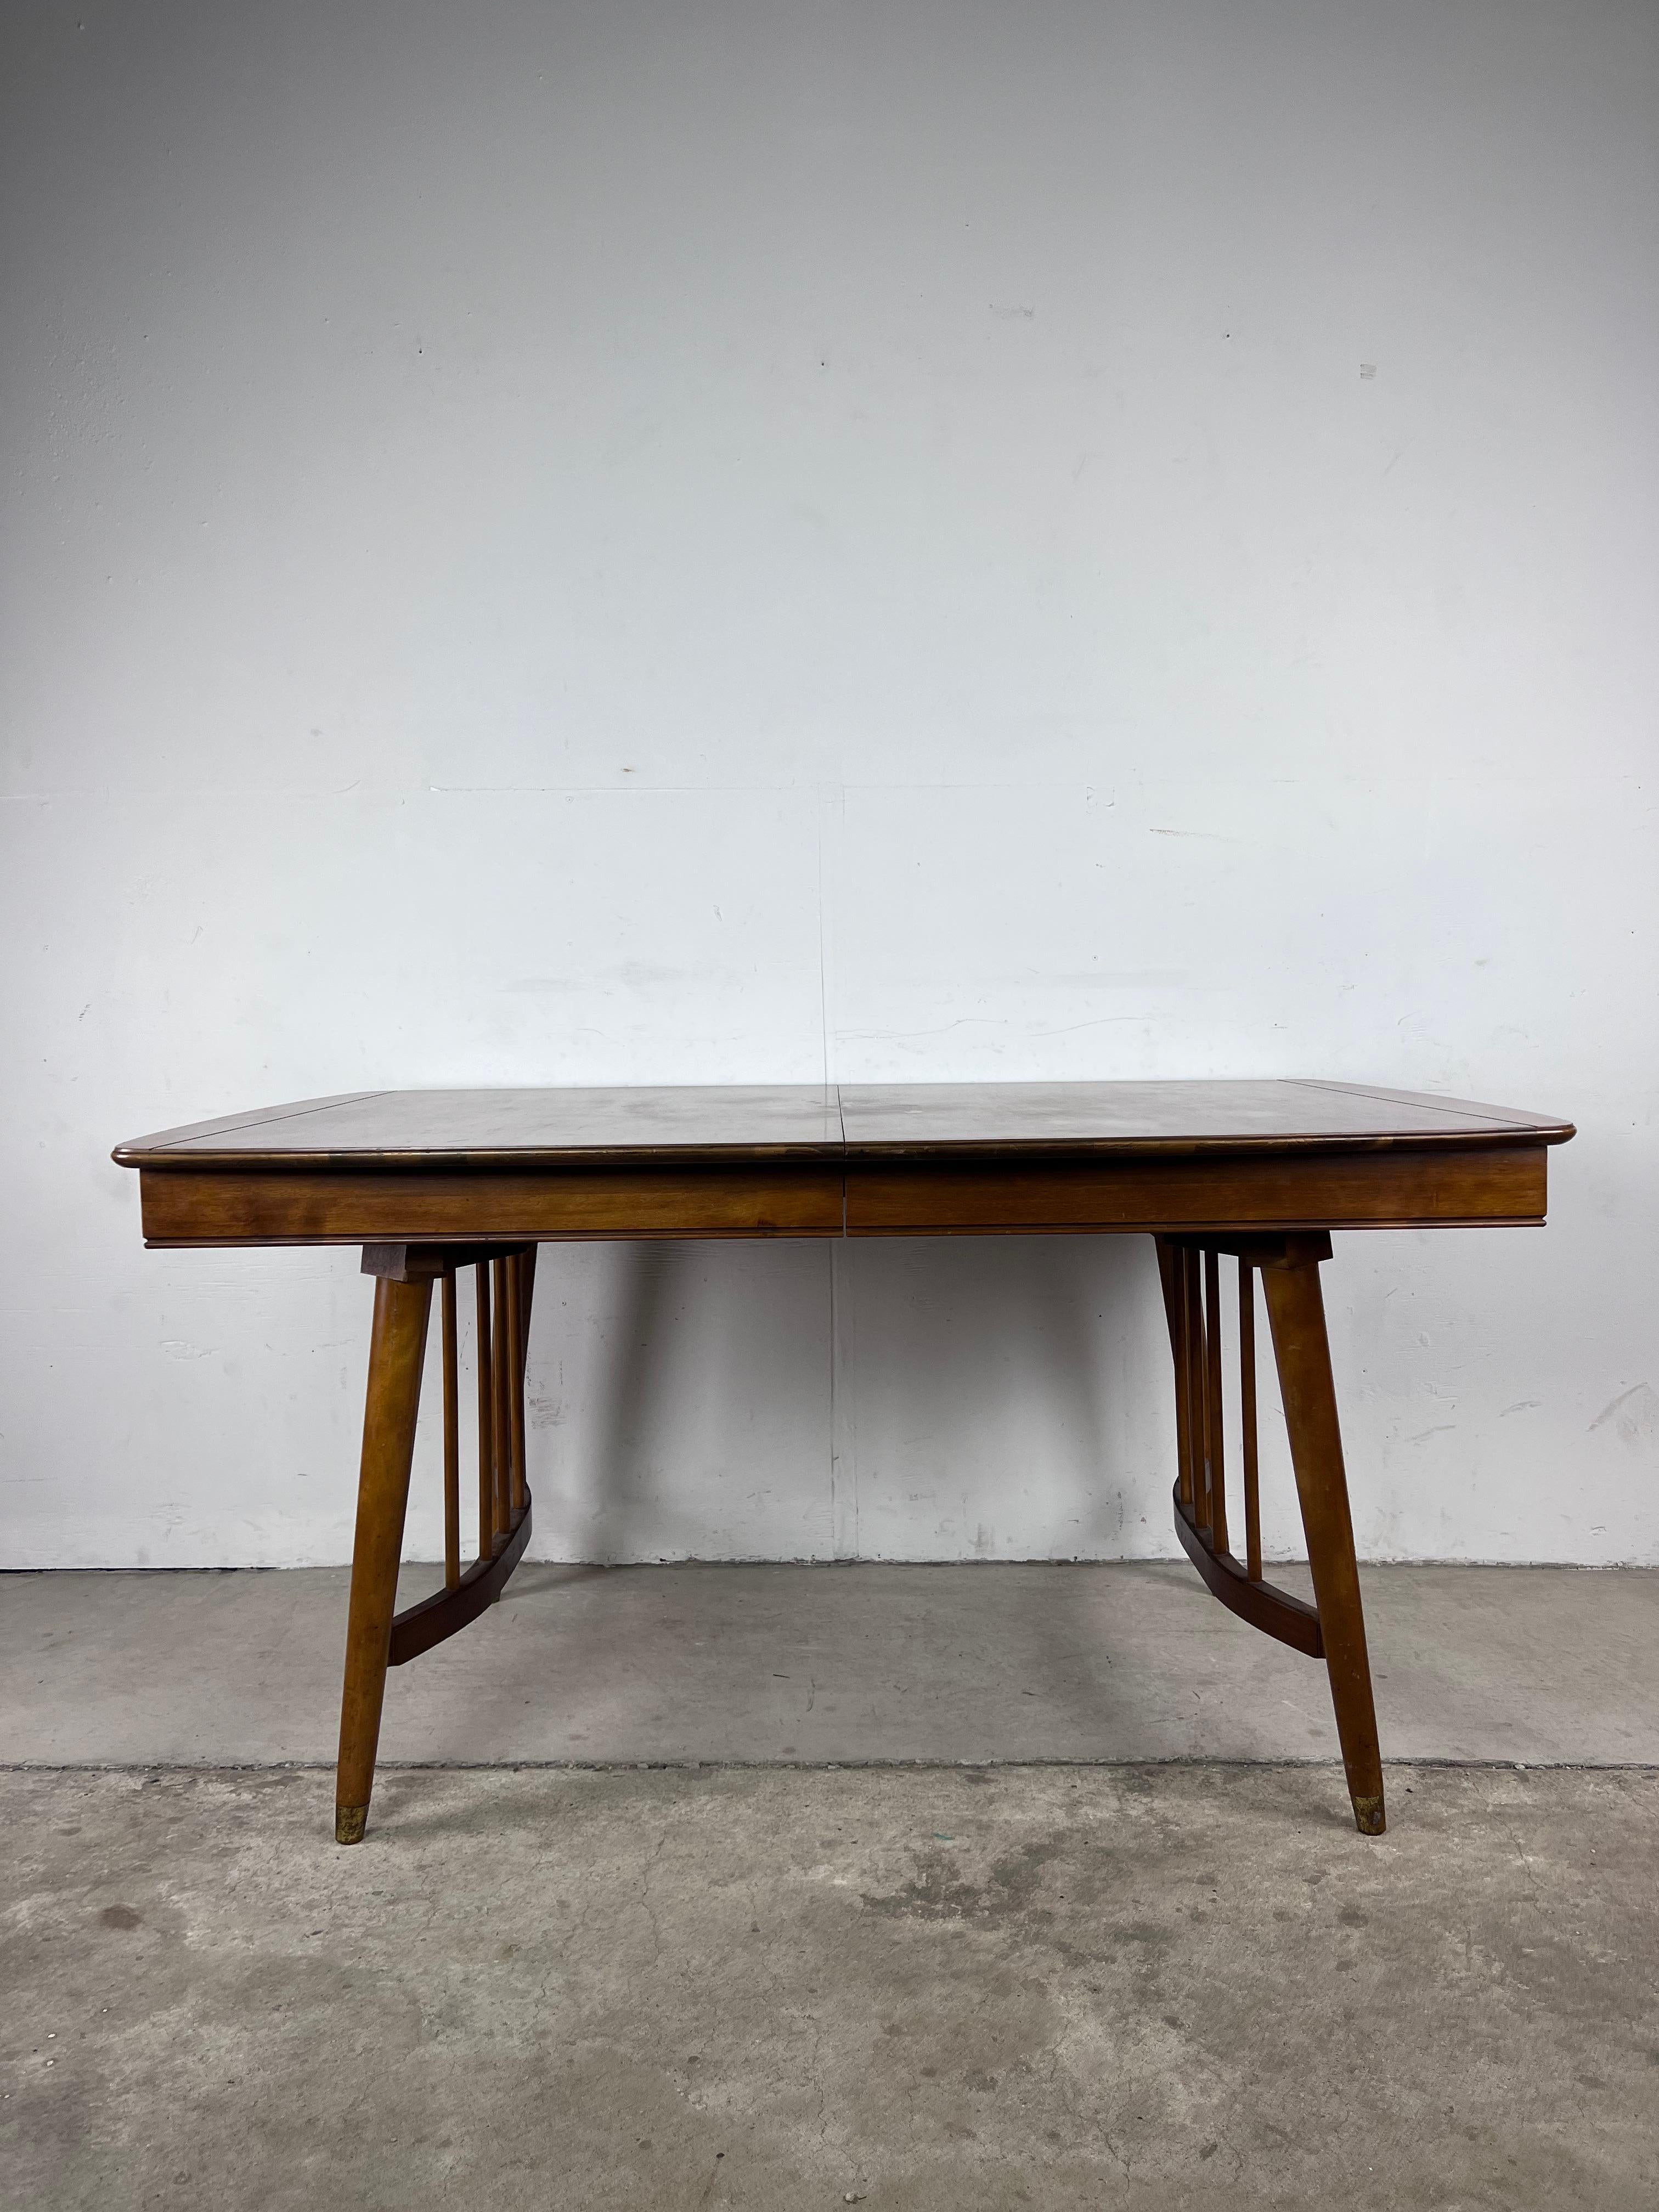 This mid century modern dining table by Ebert Furniture of Red Lion, PA features hardwood construction, walnut veneer with original finish, unique bentwood legs with brass capped feet, and a single 12